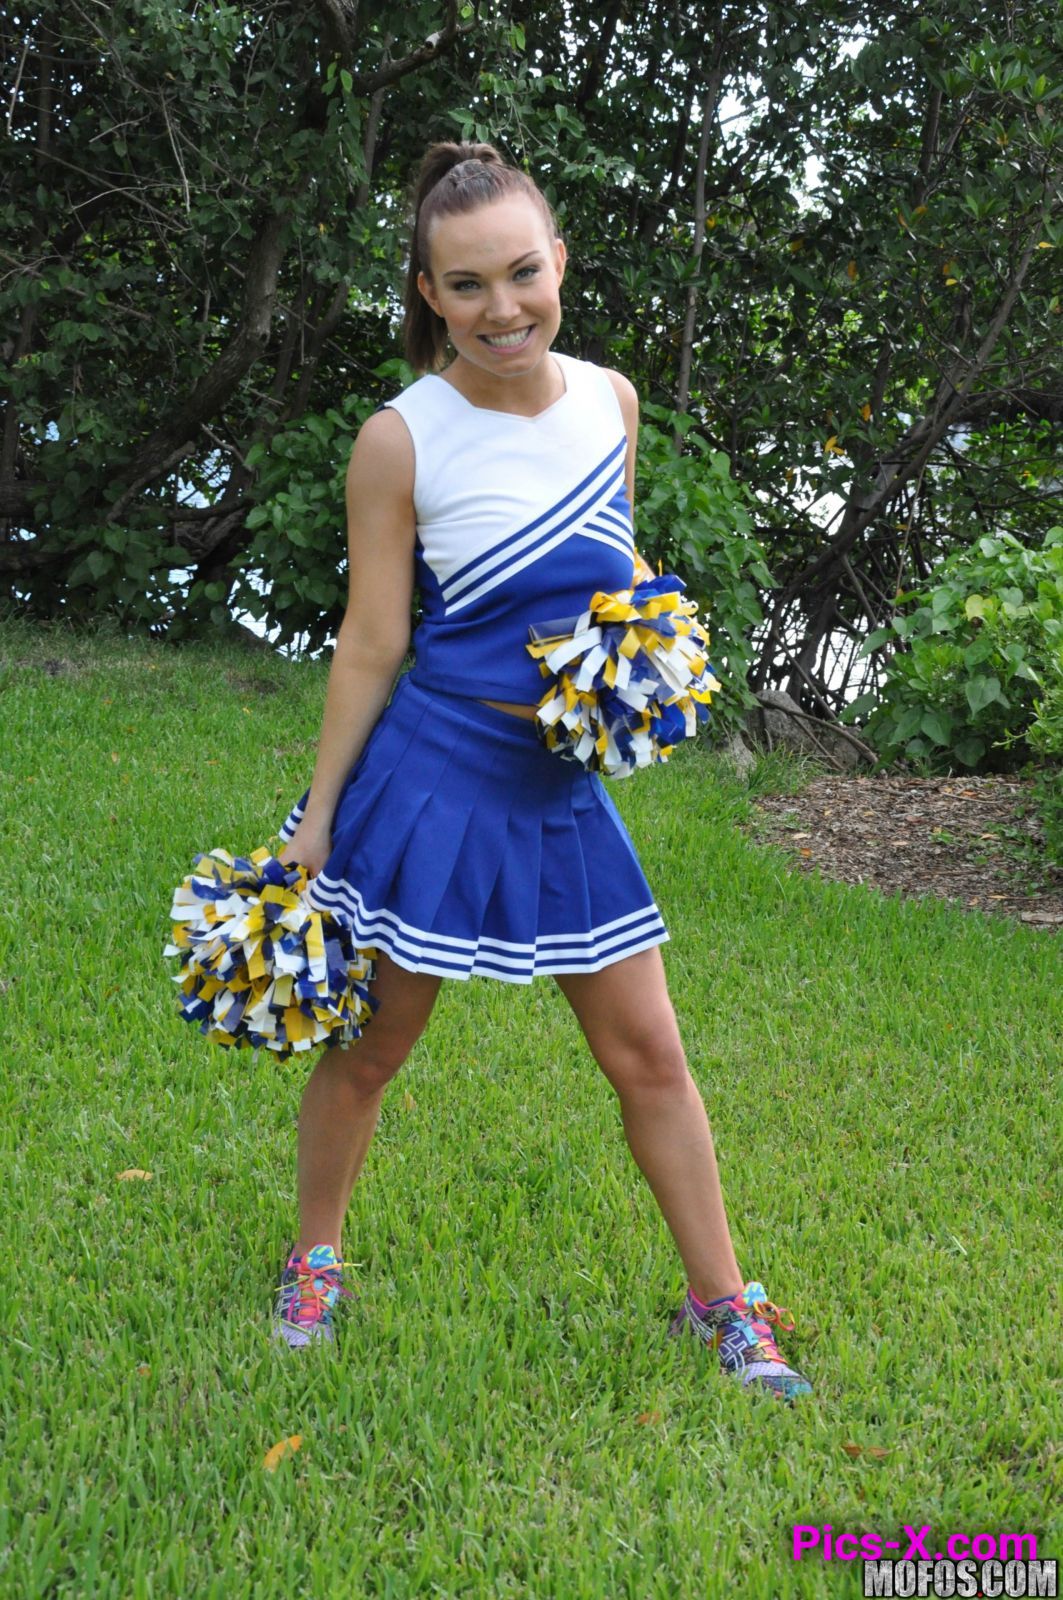 Cheerleader Teen Home Video - I Know That Girl - Image 2